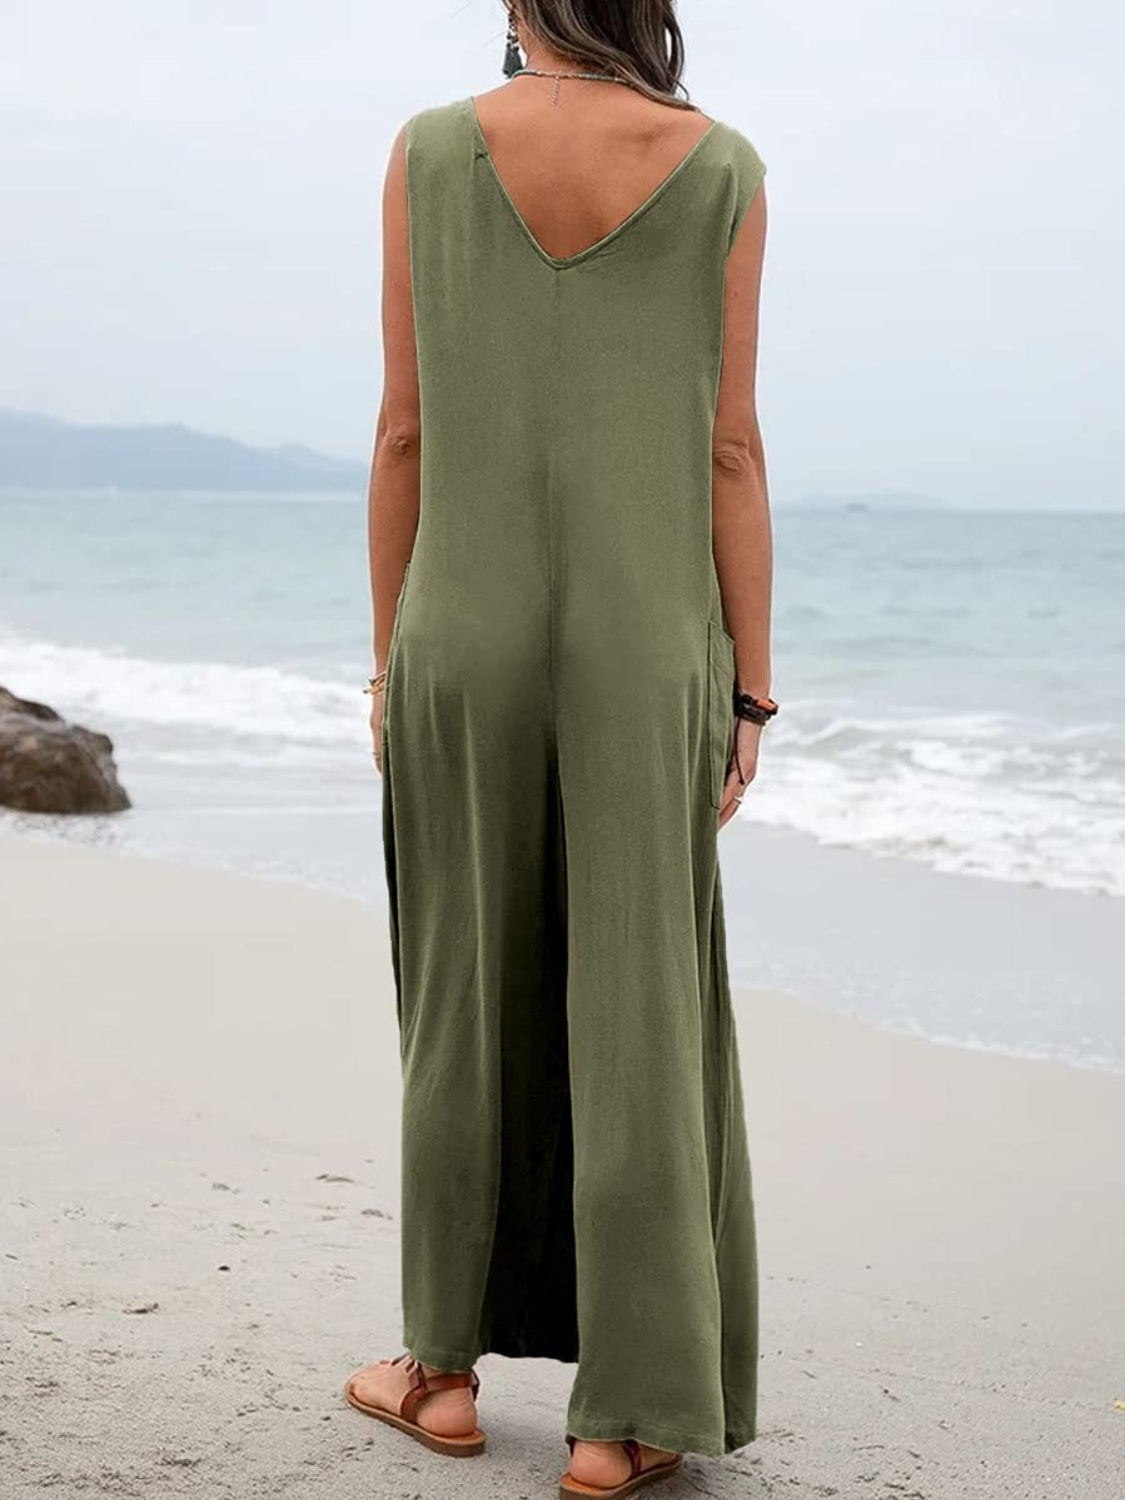 Full Size Wide Strap Jumpsuit with Pockets [ click for additional color options]